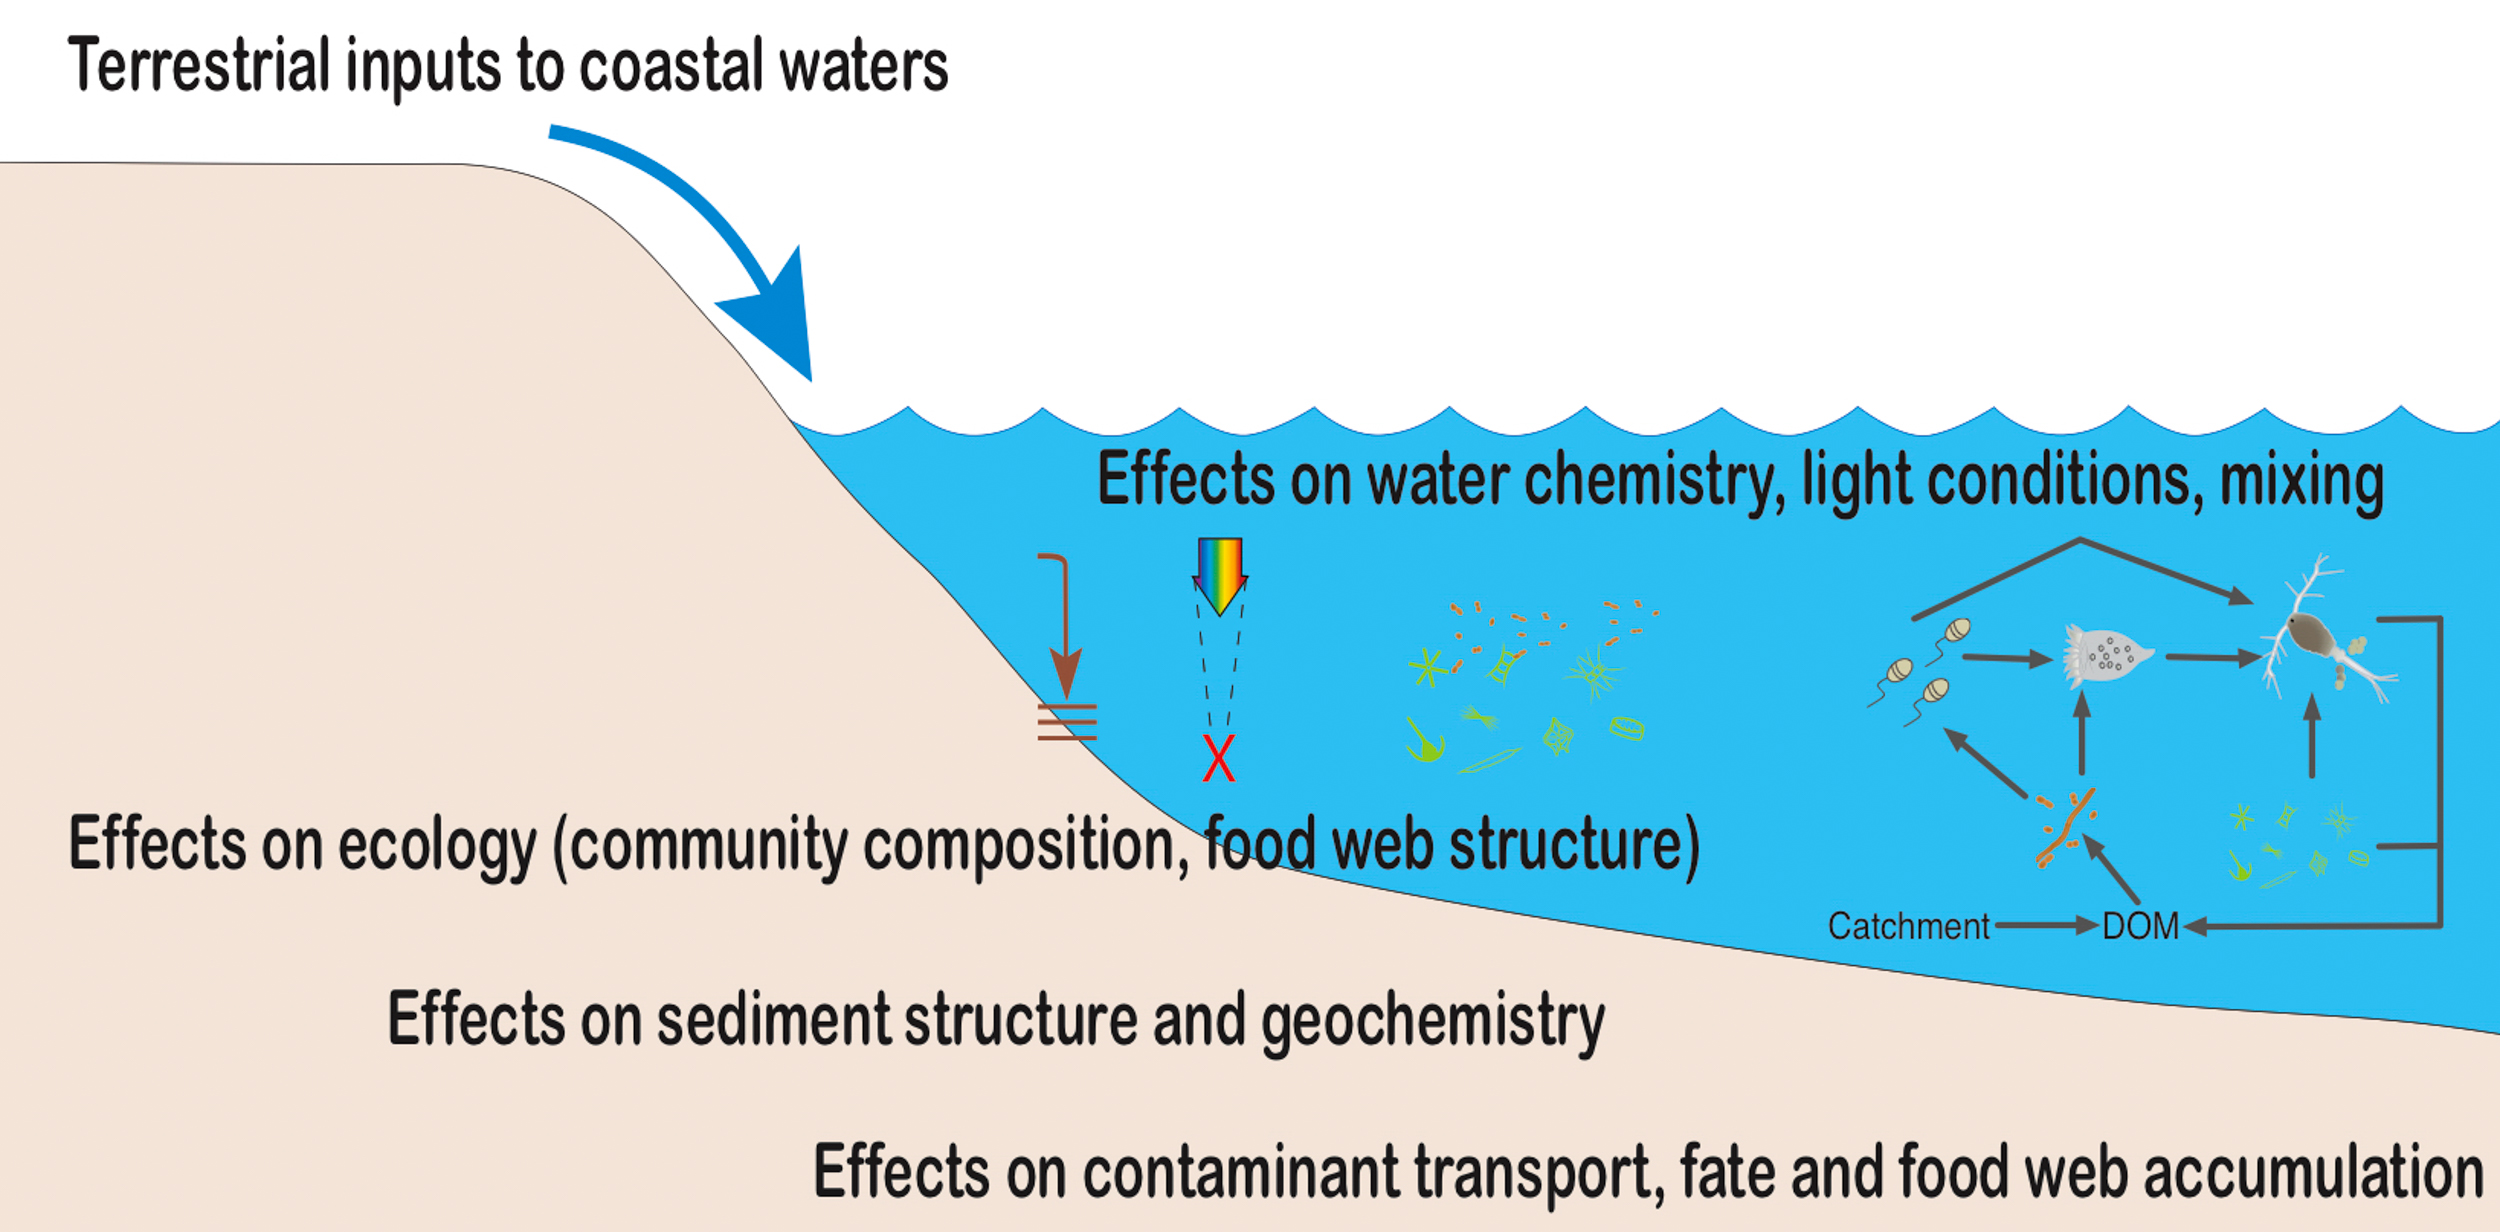 Conceptual framework for how terrestrial inputs can affect coastal biogeochemistry, ecology and contaminant dynamics. DOM = dissolved organic matter